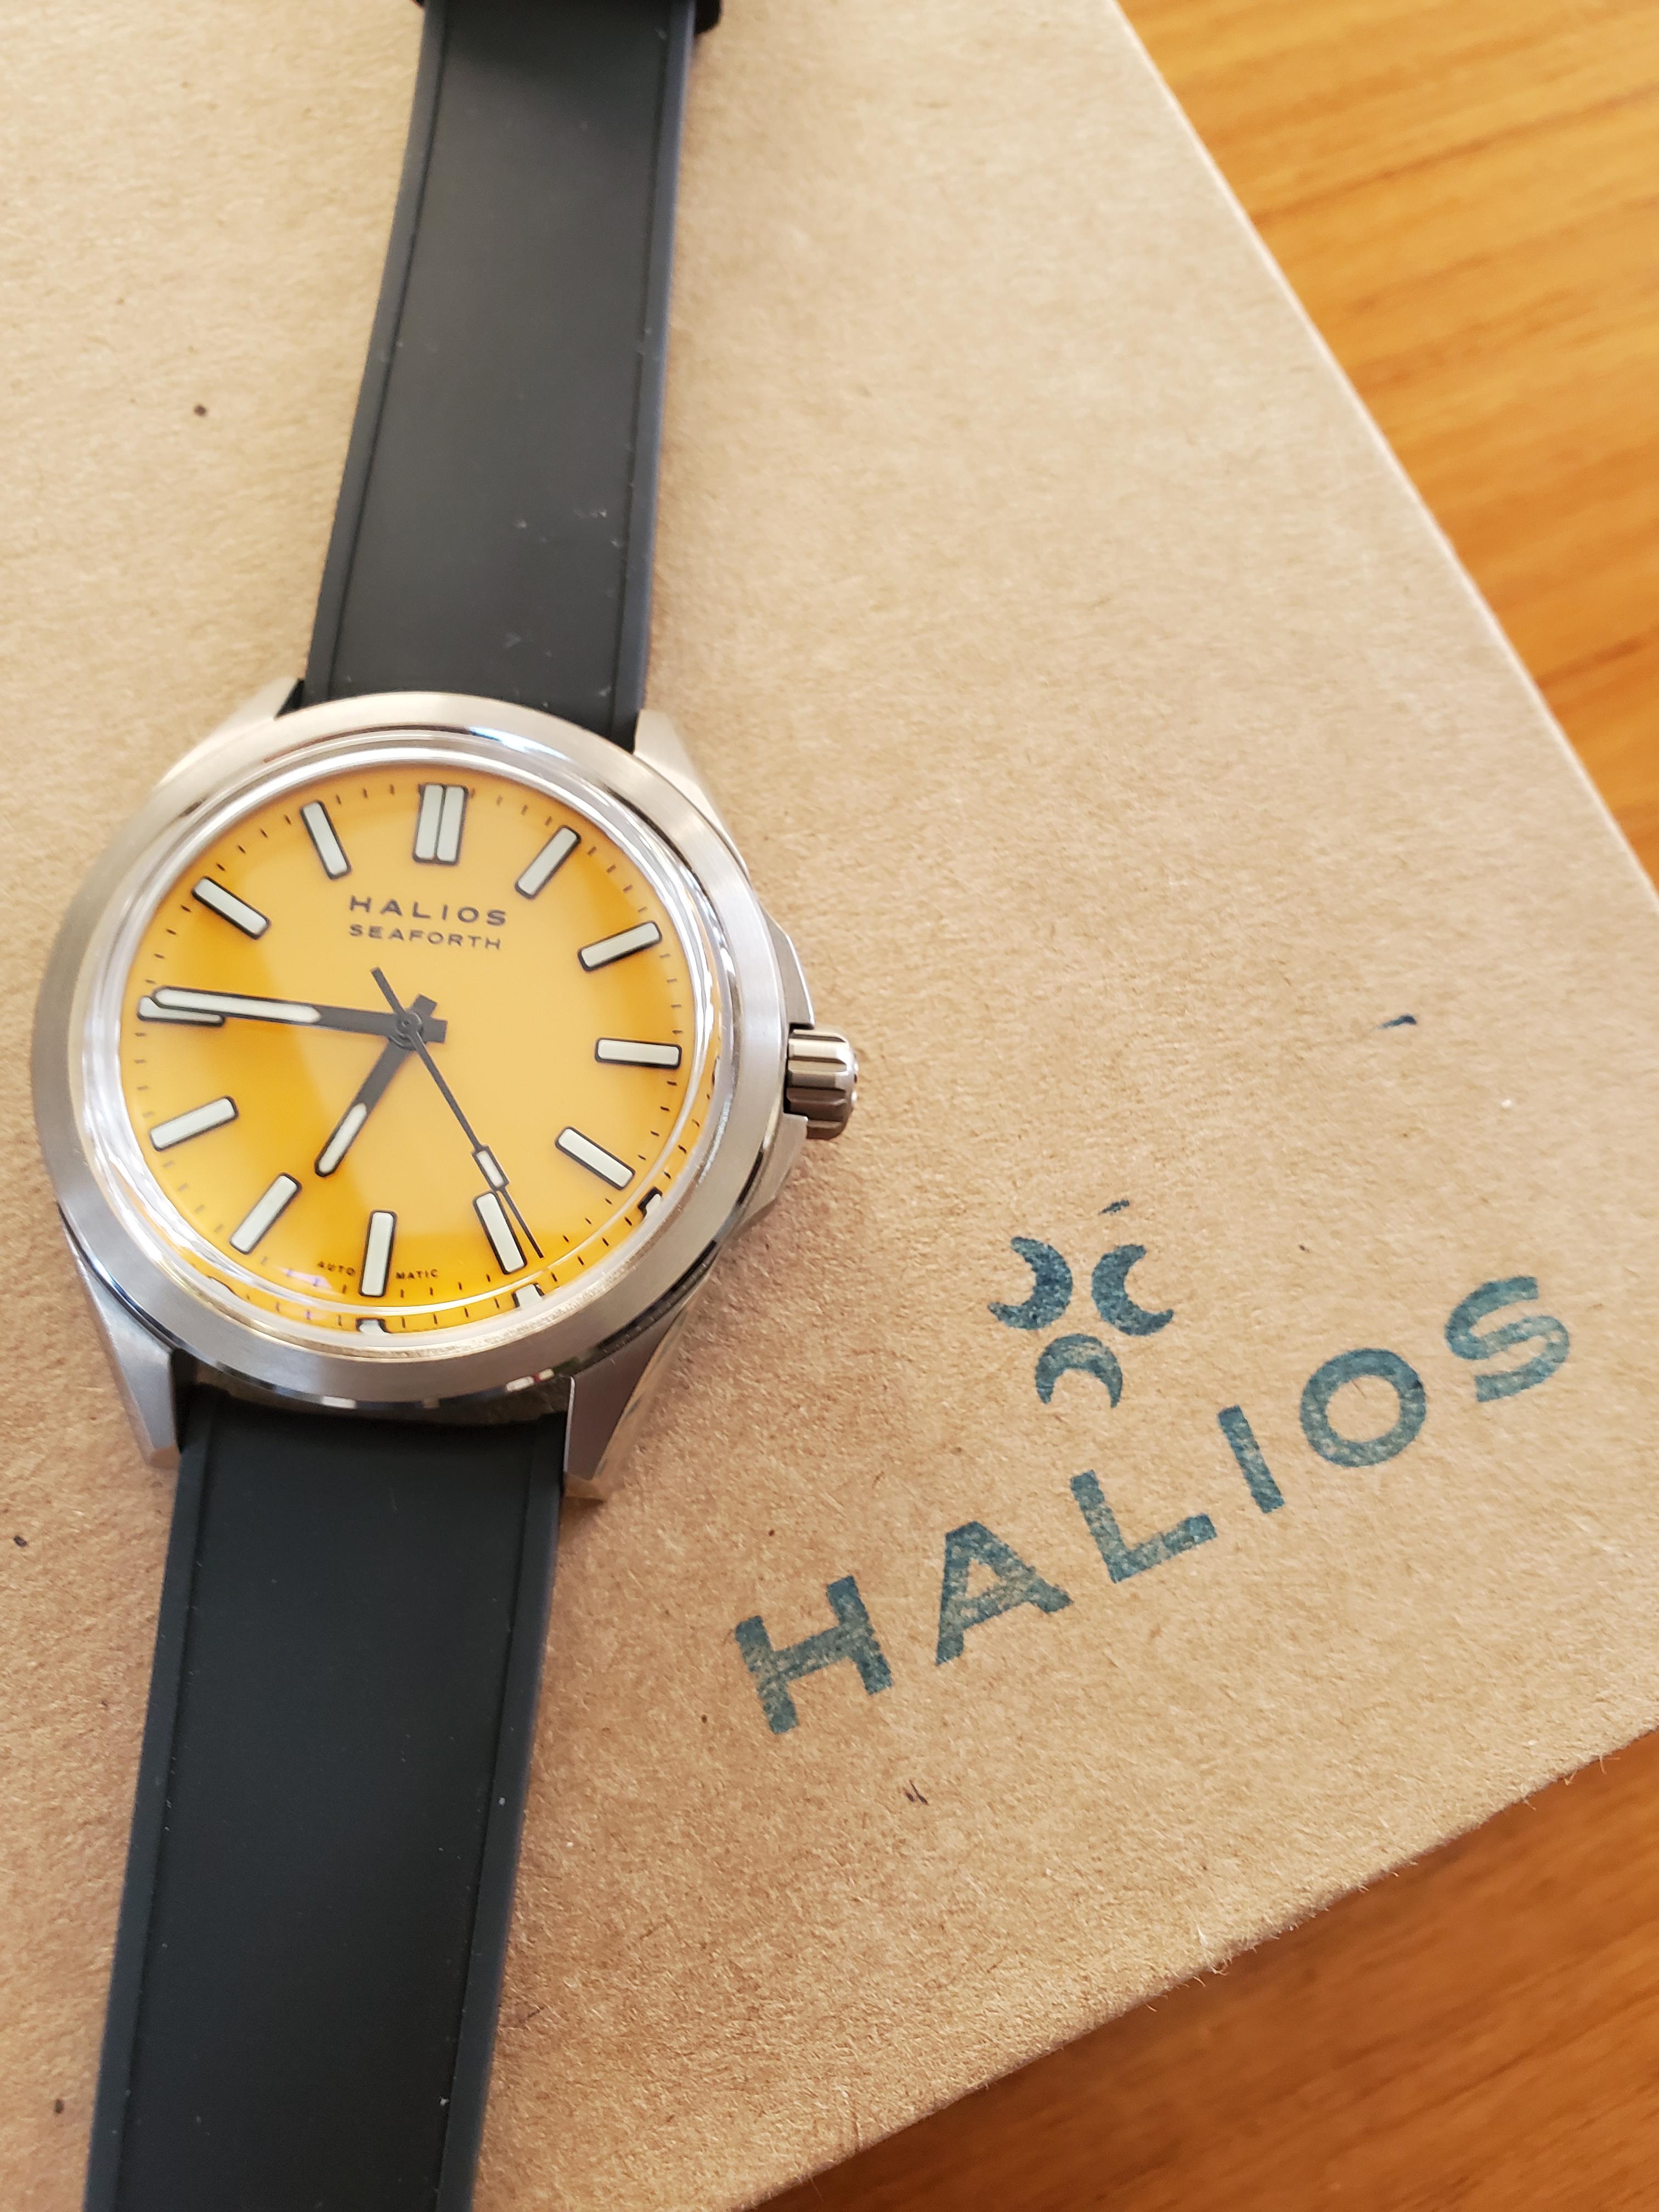 Owner Review: Halios Seaforth - FIFTH WRIST